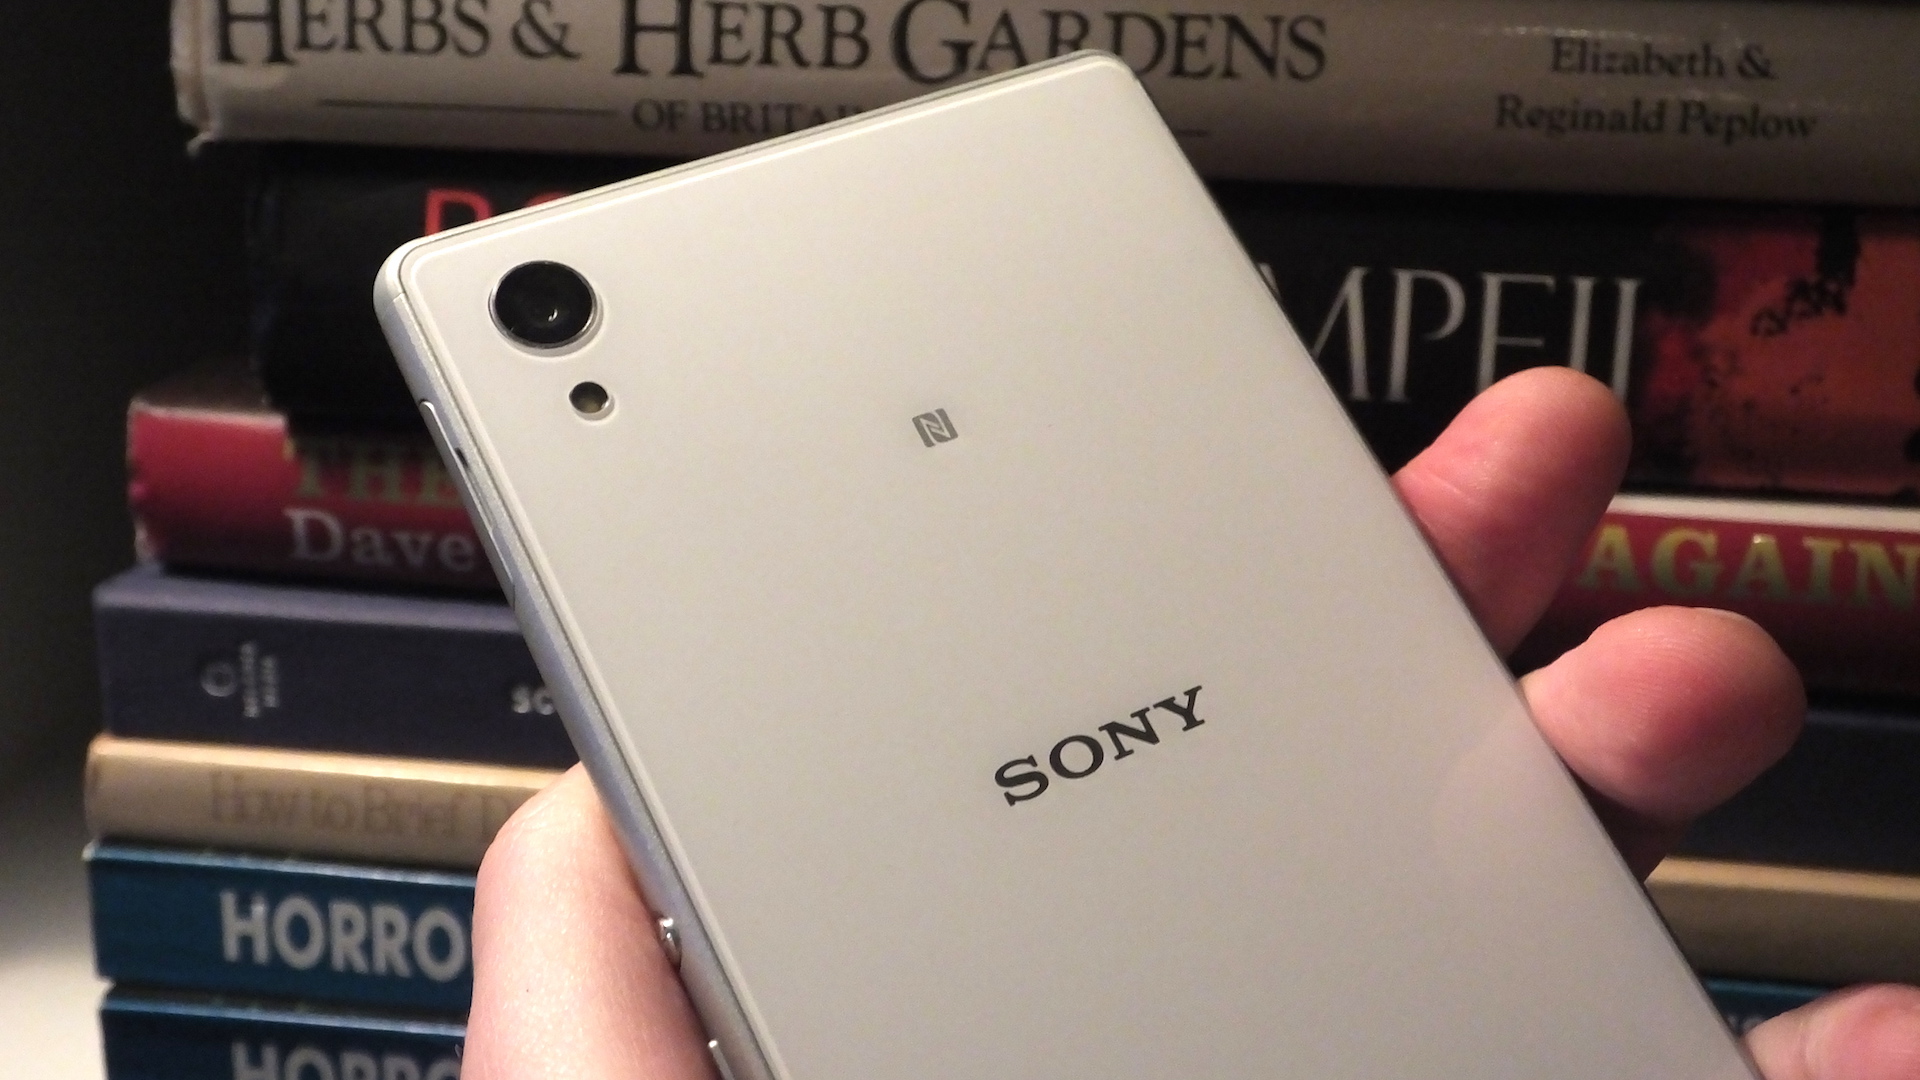 Sony Xperia M4 Aqua Hands-On: Proper Waterproofing, Two Day Battery